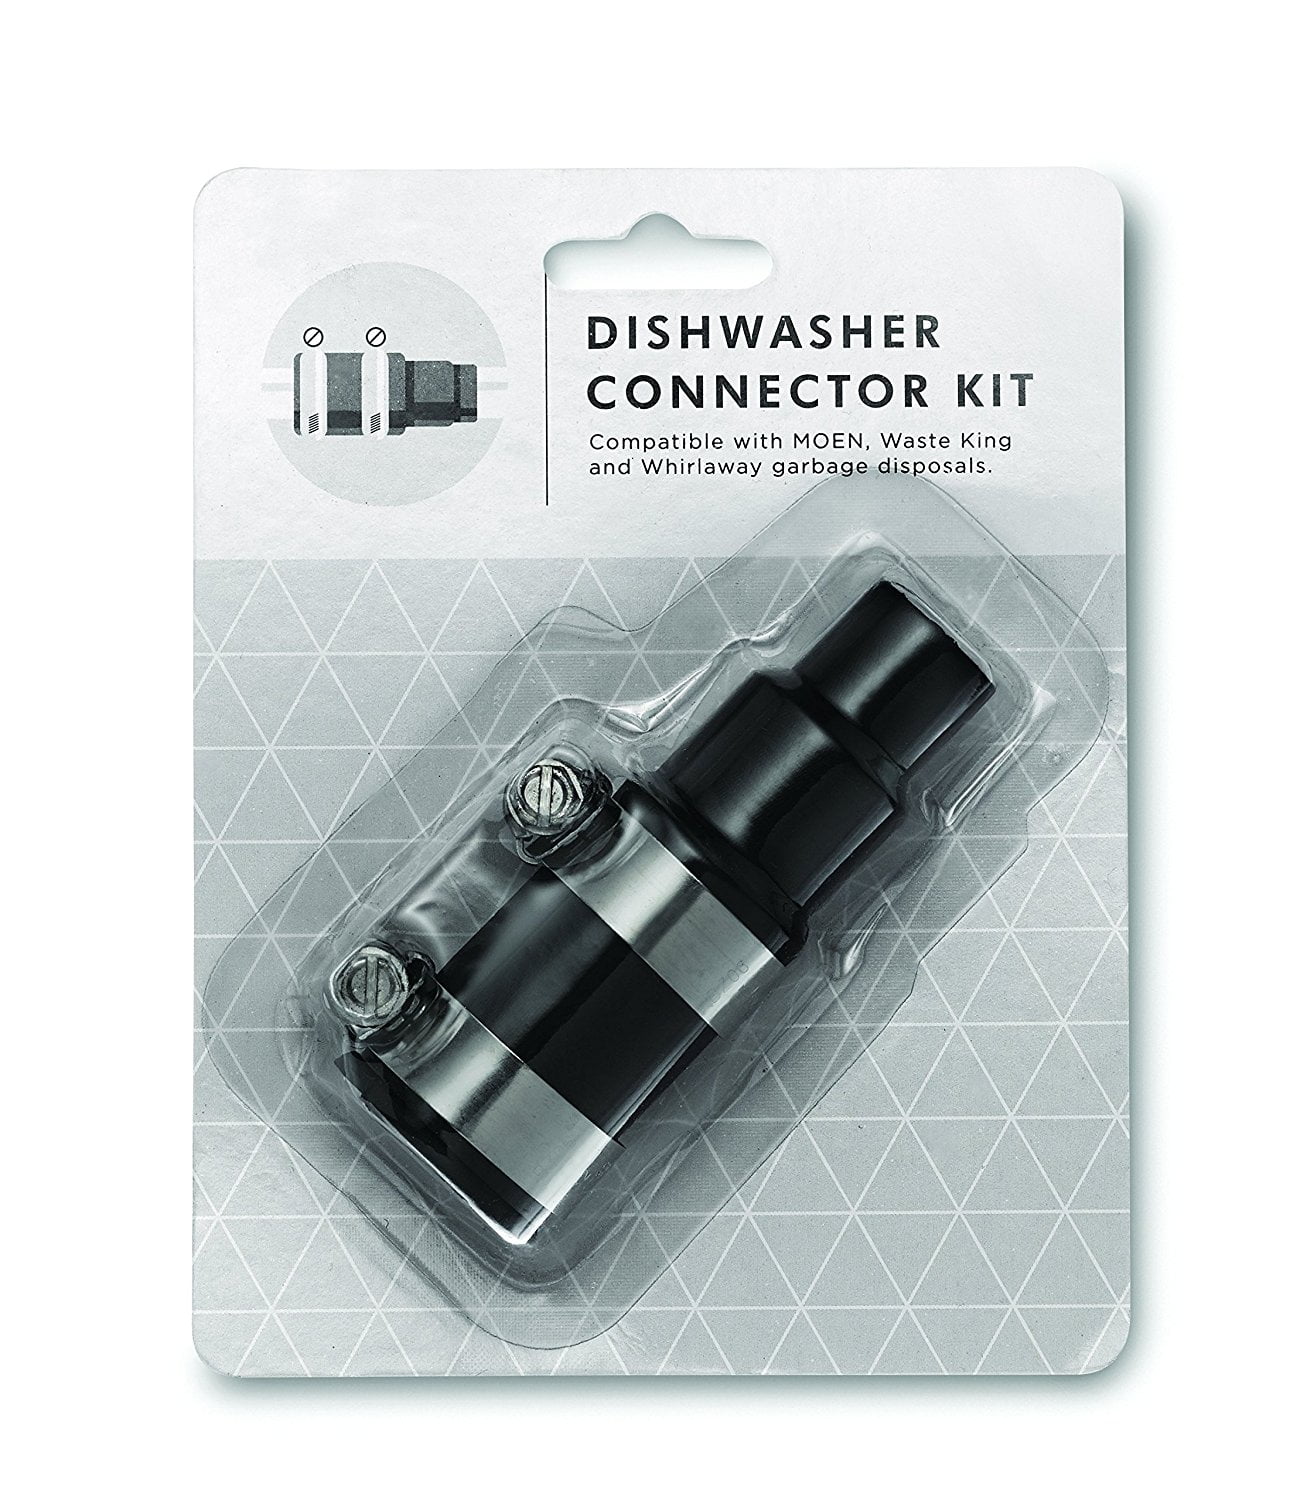 Dishwasher Connector Kit,Universal Connector,Adapter For Connecting A Dishwasher To A Disposer By Essential Values,Grace Make Garbage Disposal Dishwasher Connector Kit